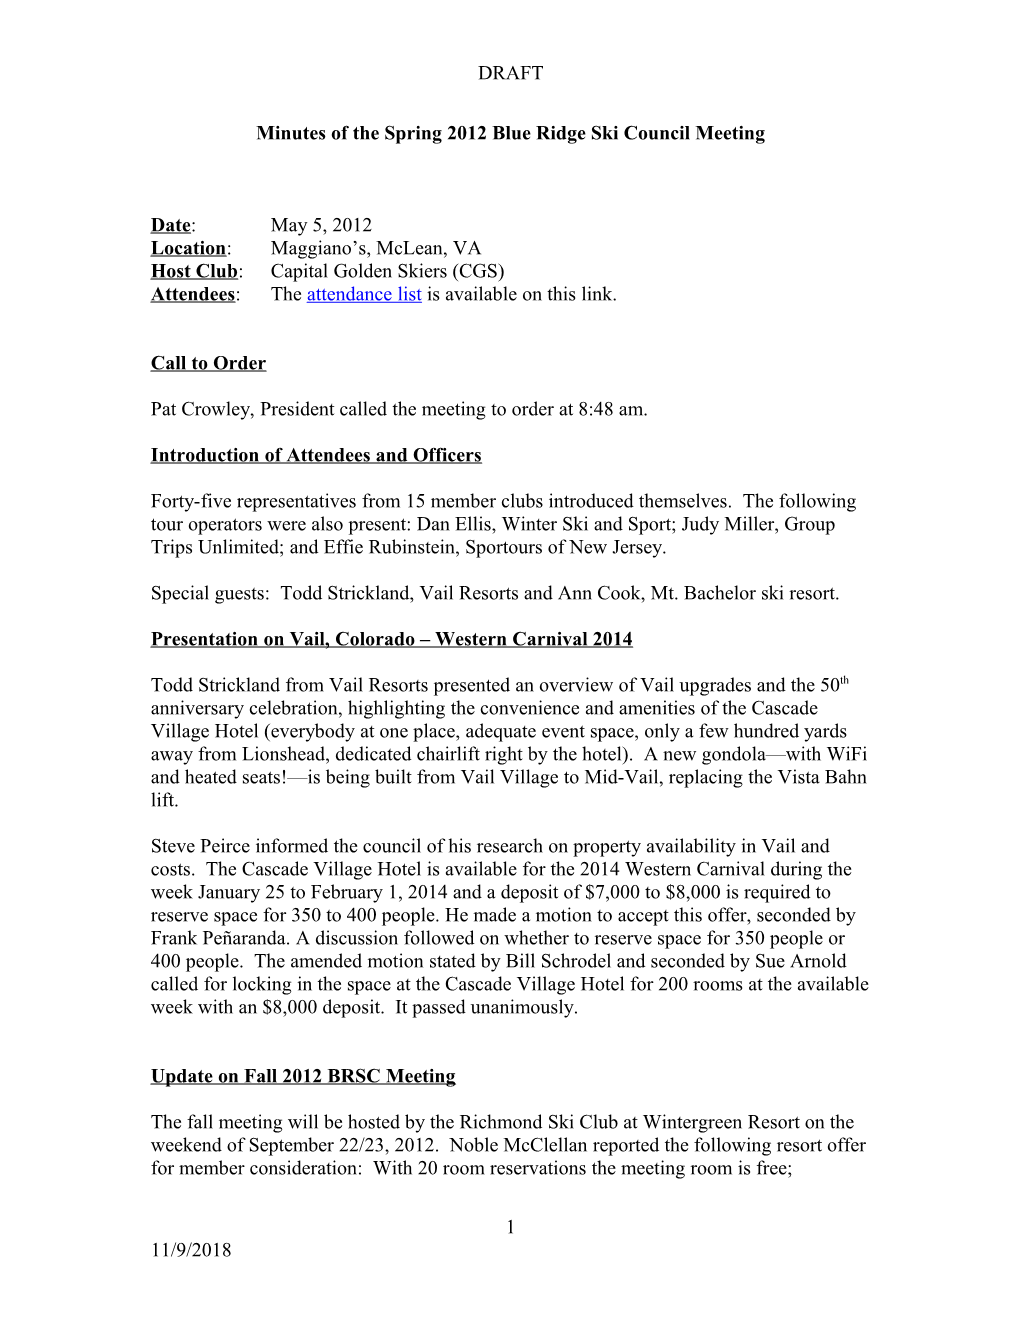 Minutes of the Spring 2012 Blue Ridge Ski Council Meeting